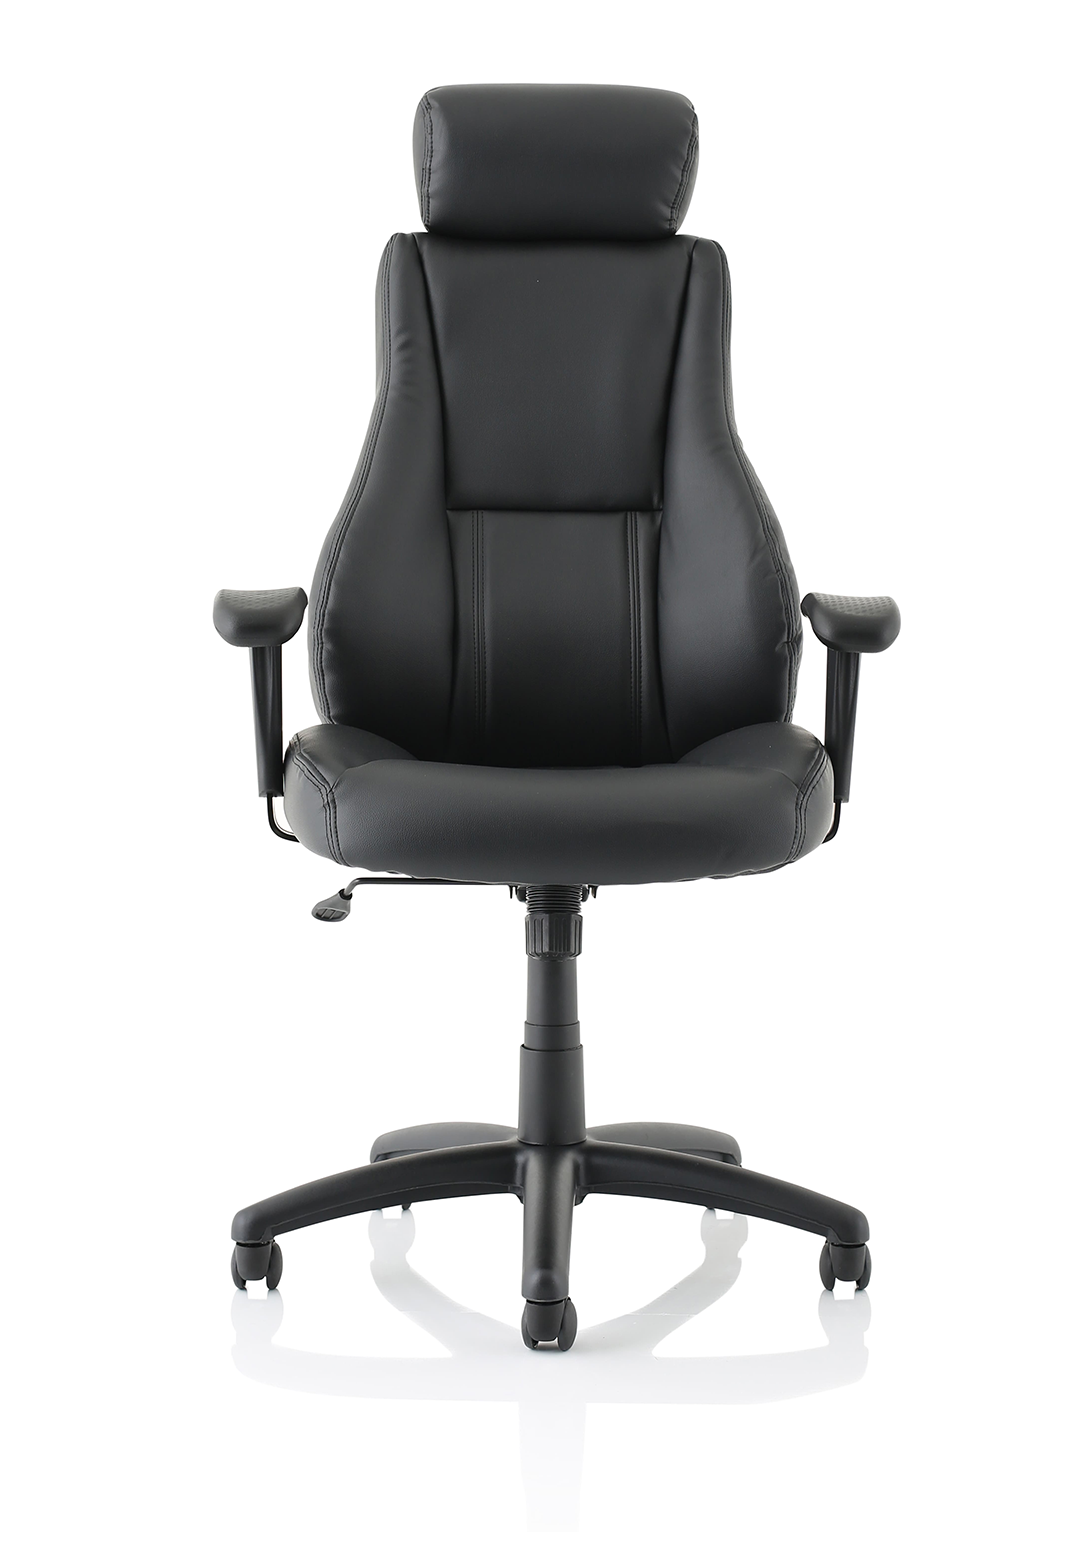 Winsor Leather Exec Home Office Chair | Executive Chair | Home Office Furniture | Leather Chair| Chrome detail | Swivel Chair | Leather Swivel Chair